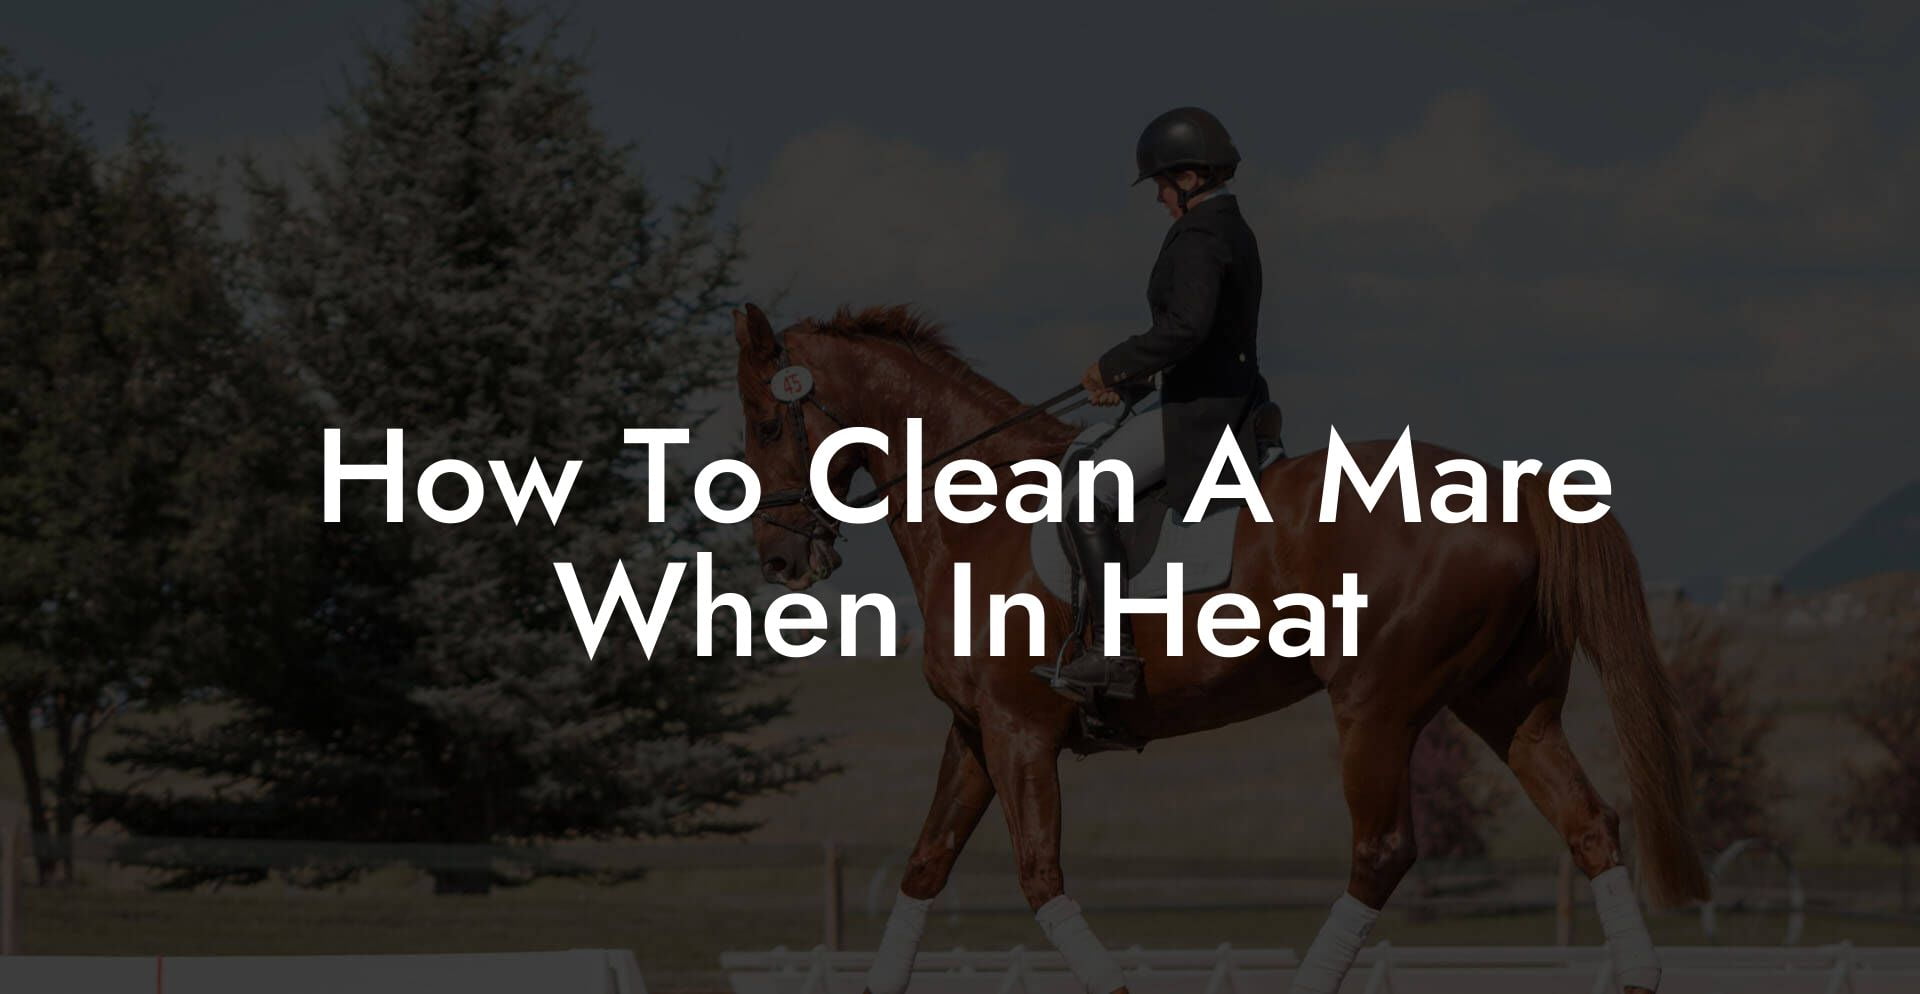 How To Clean A Mare When In Heat